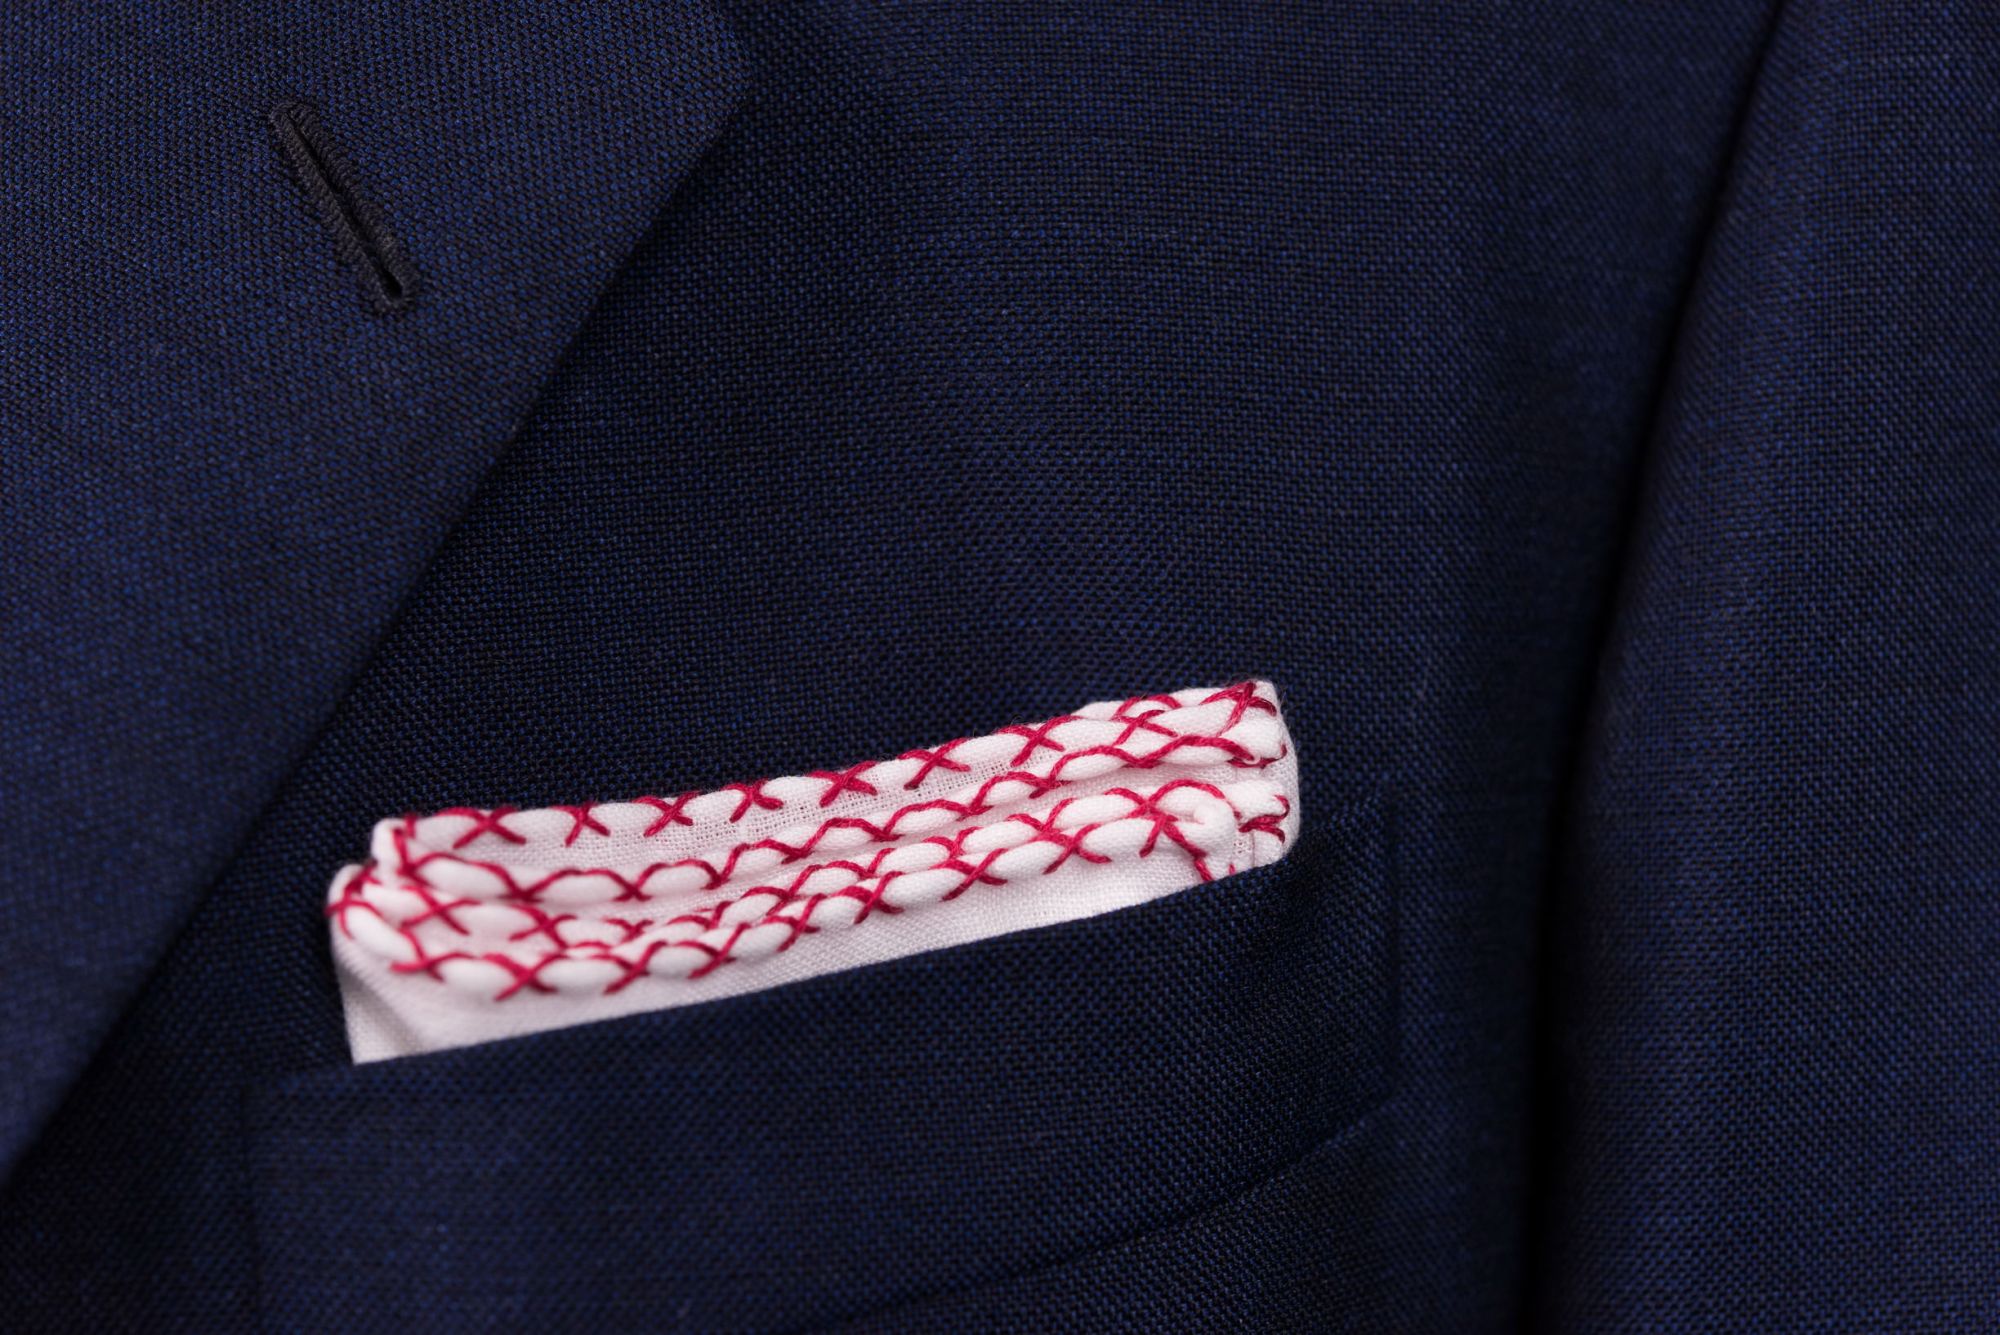 Burgundy Red Handcrafted Linen Pocket Square with White Handrolled X Stitch  - Fort Belvedere